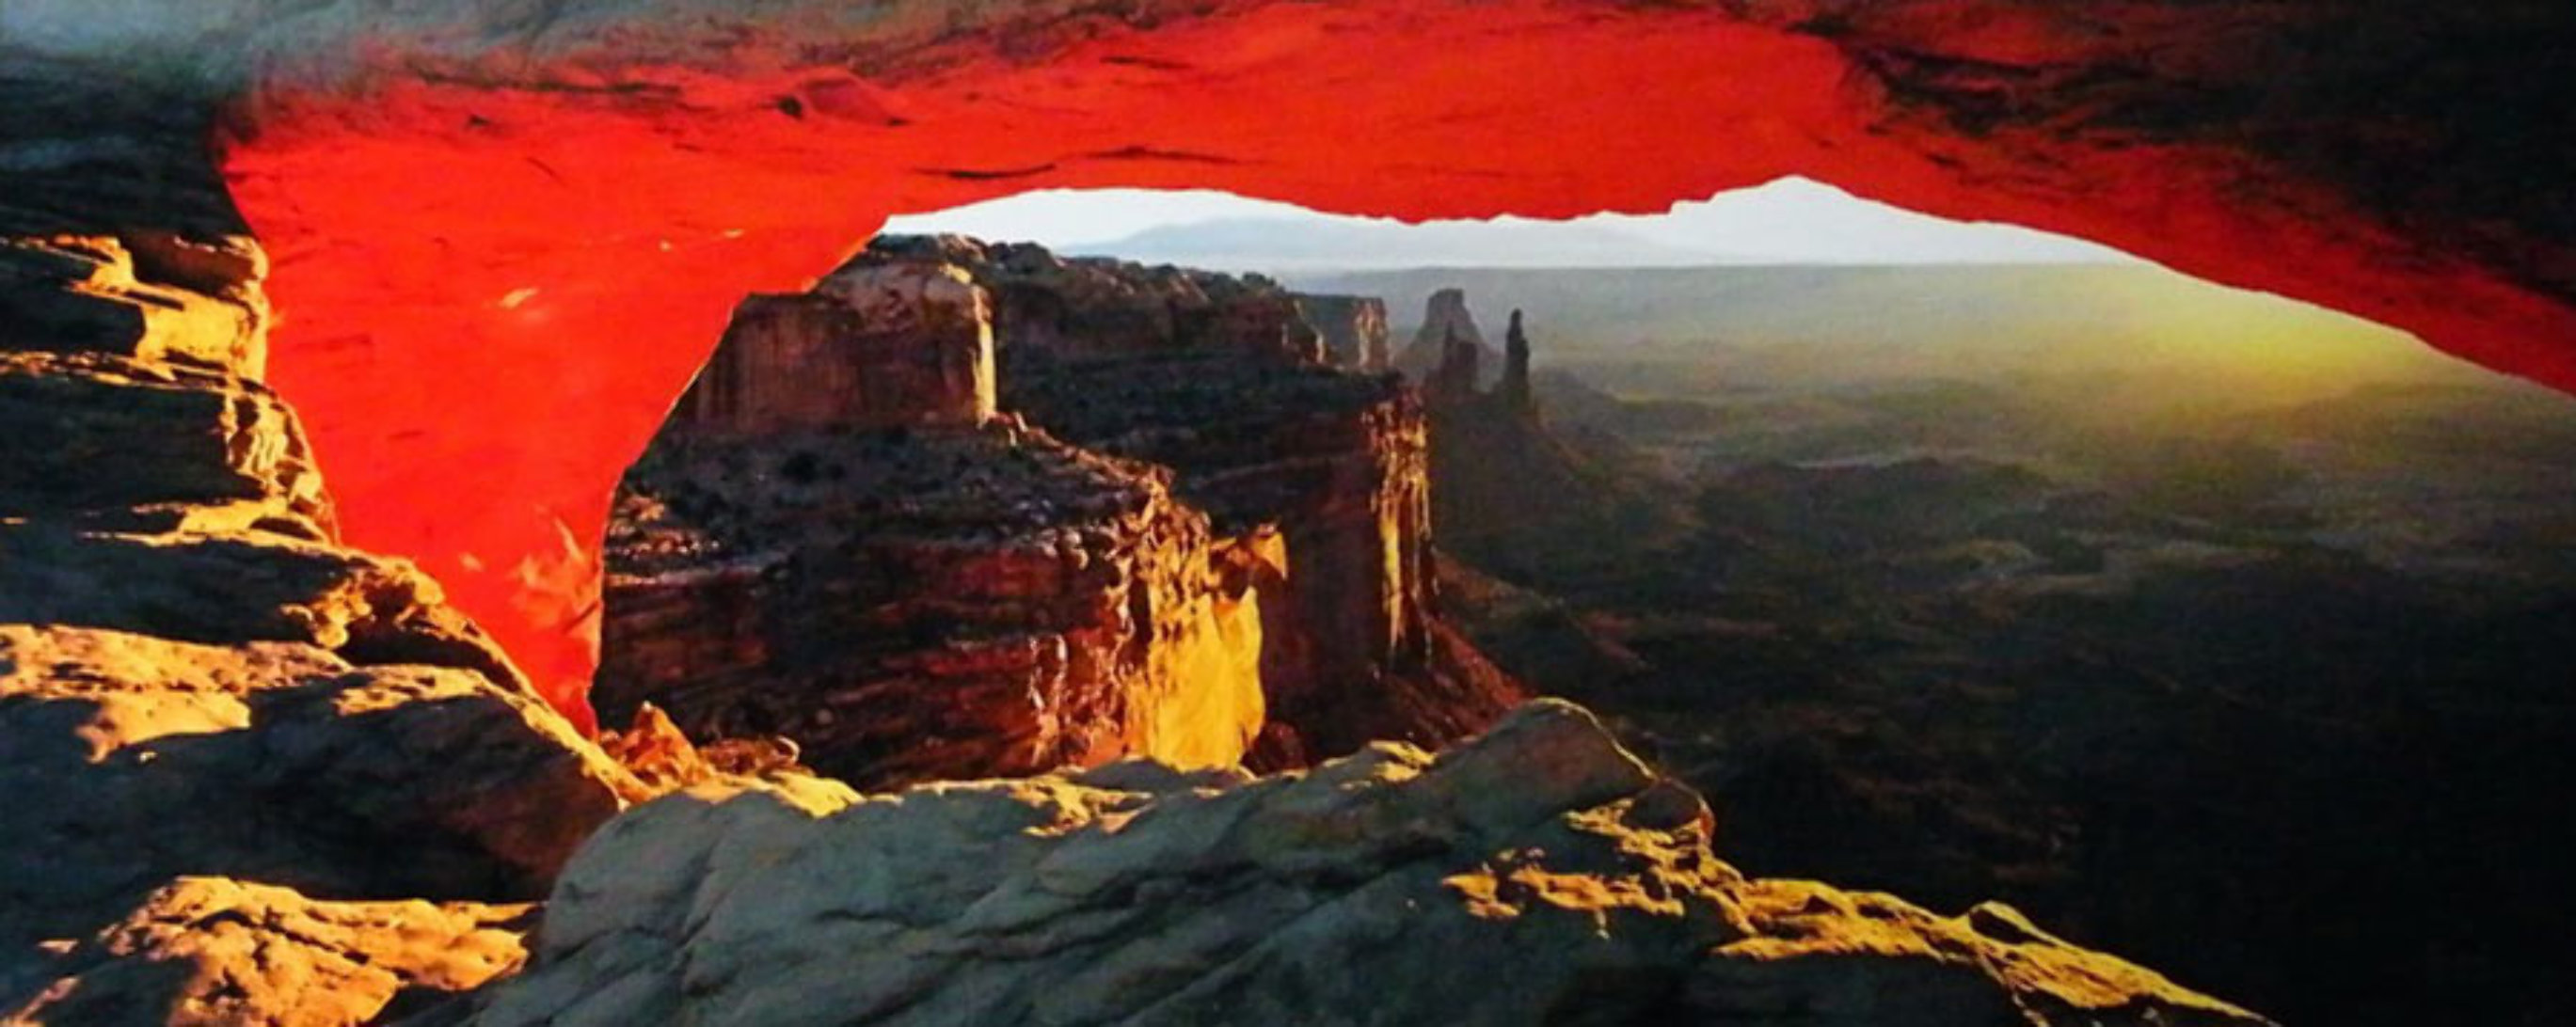 Echoes of Silence (Canyonlands National Park, Utah) 1.5M Huge Panorama by Peter Lik